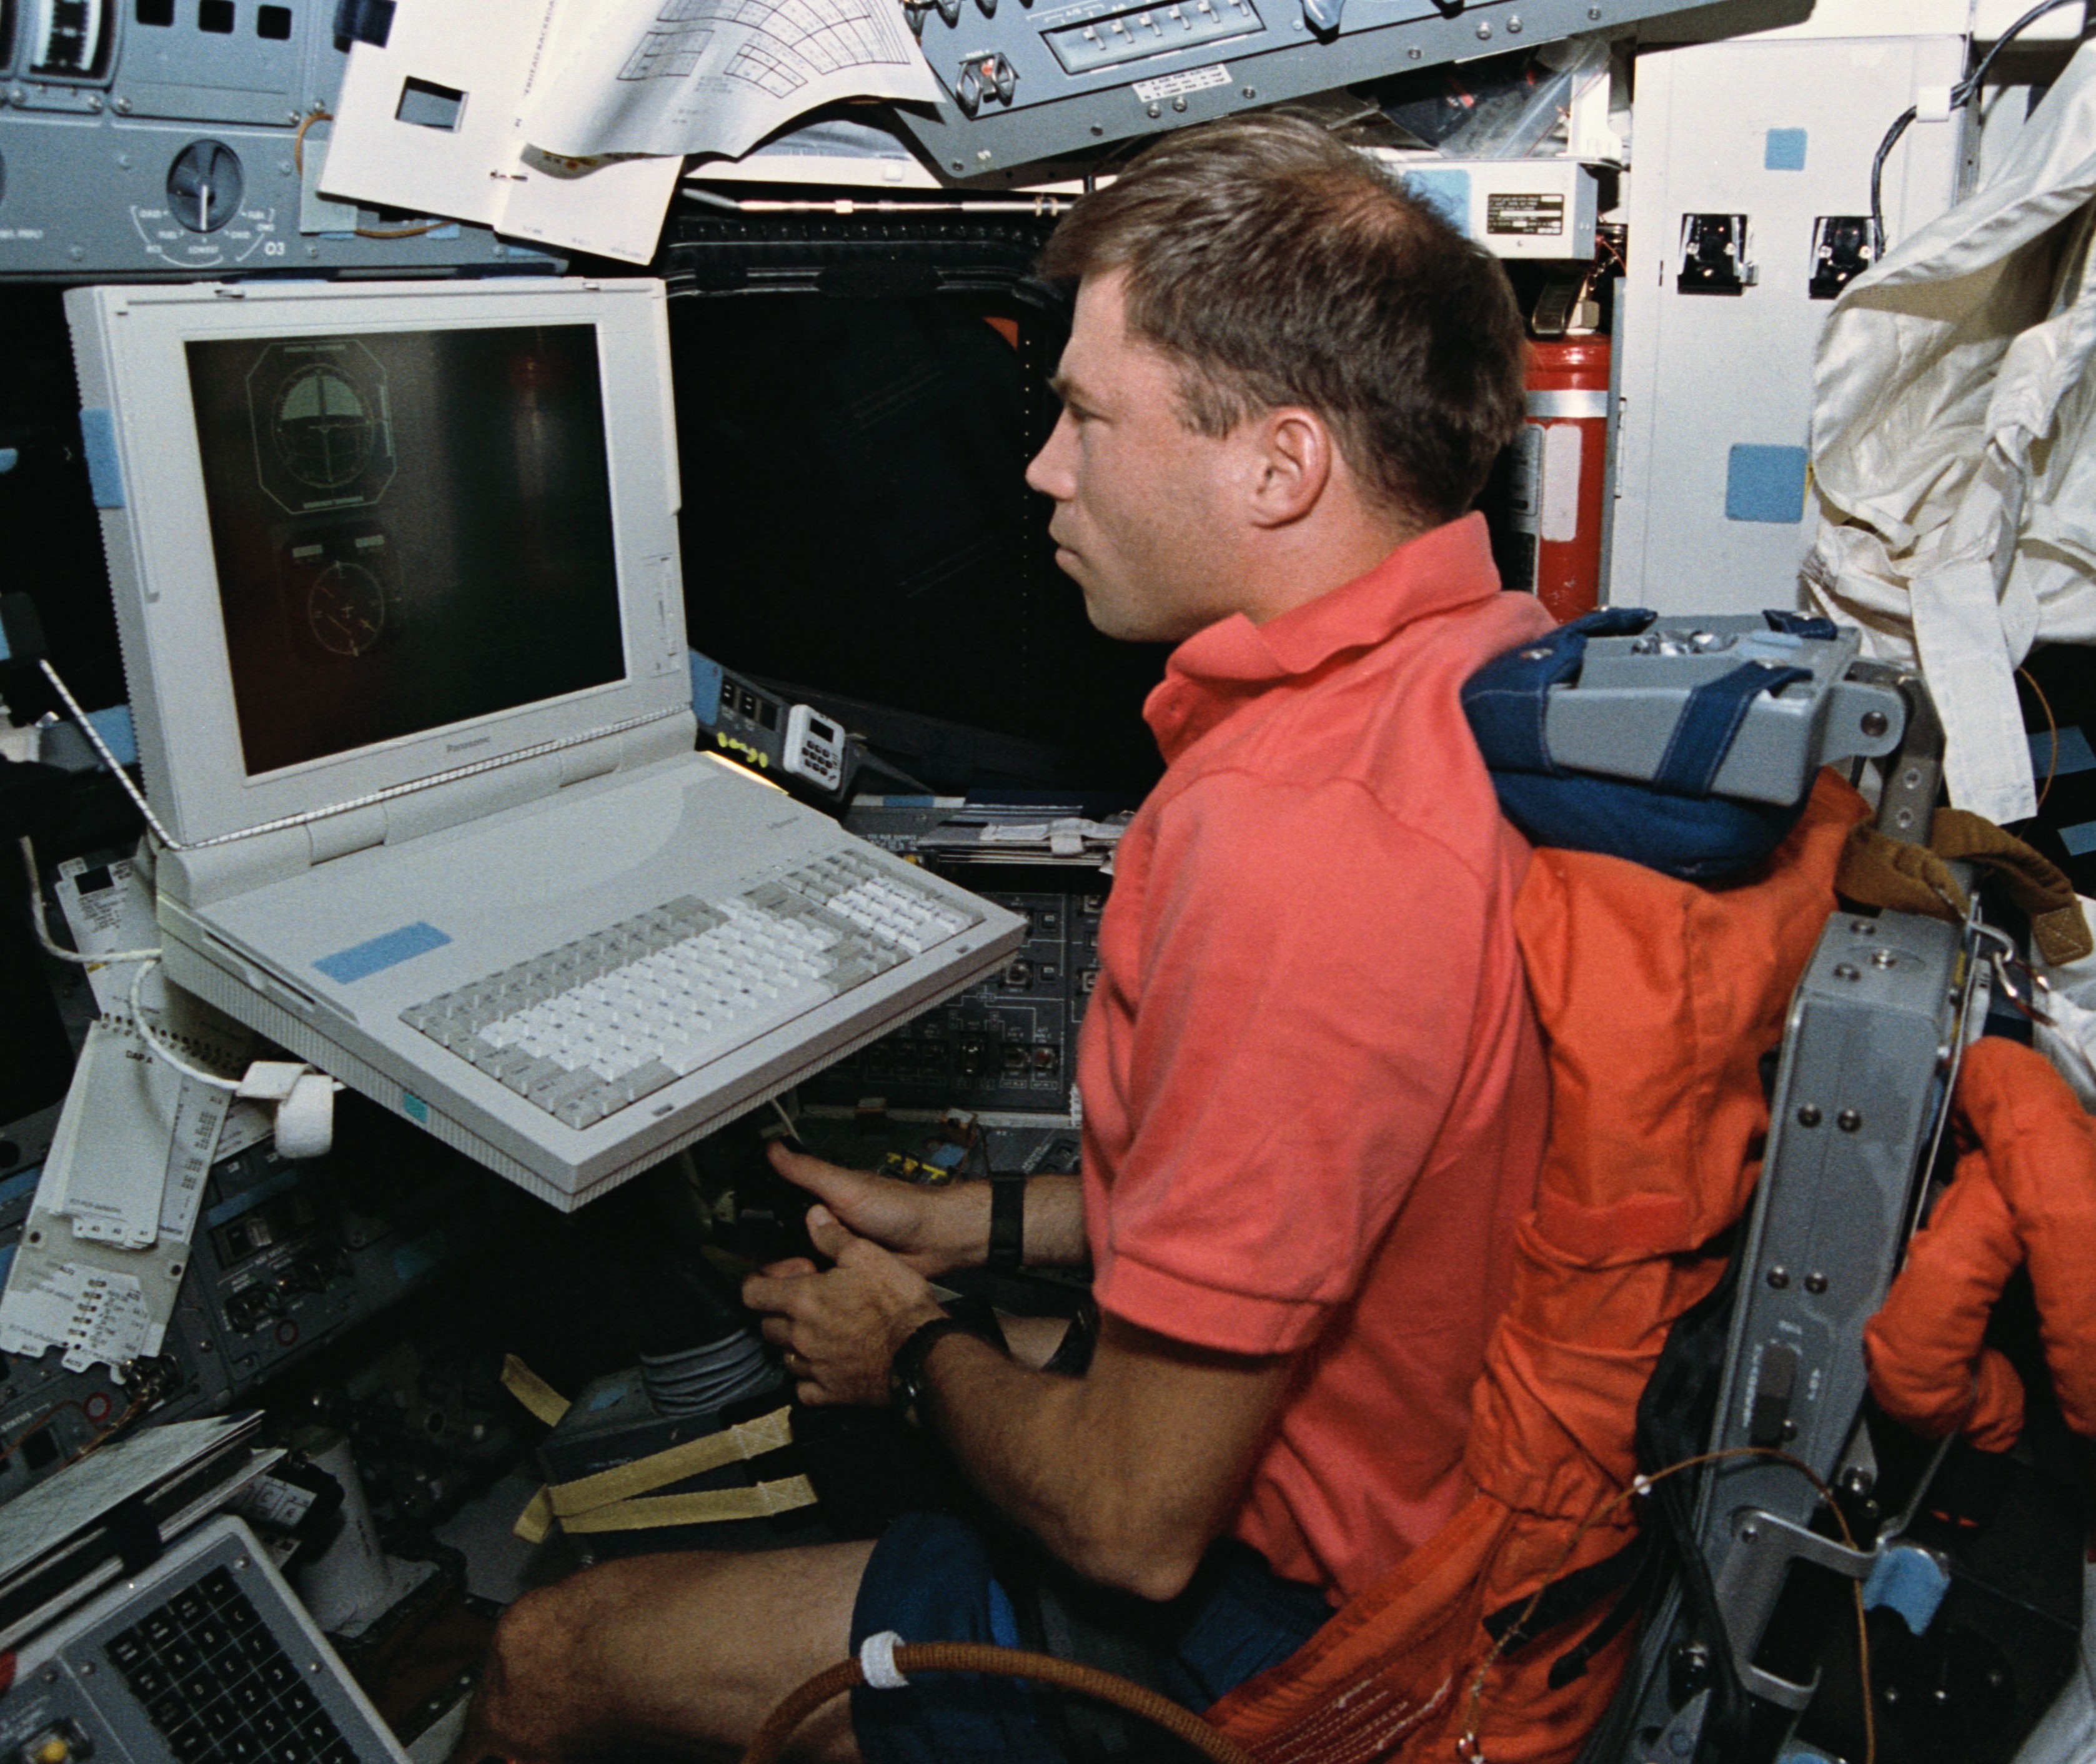 Pilot Searfoss uses the Portable In-flight Landing Operations Simulator, a laptop computer to practice landing the space shuttle